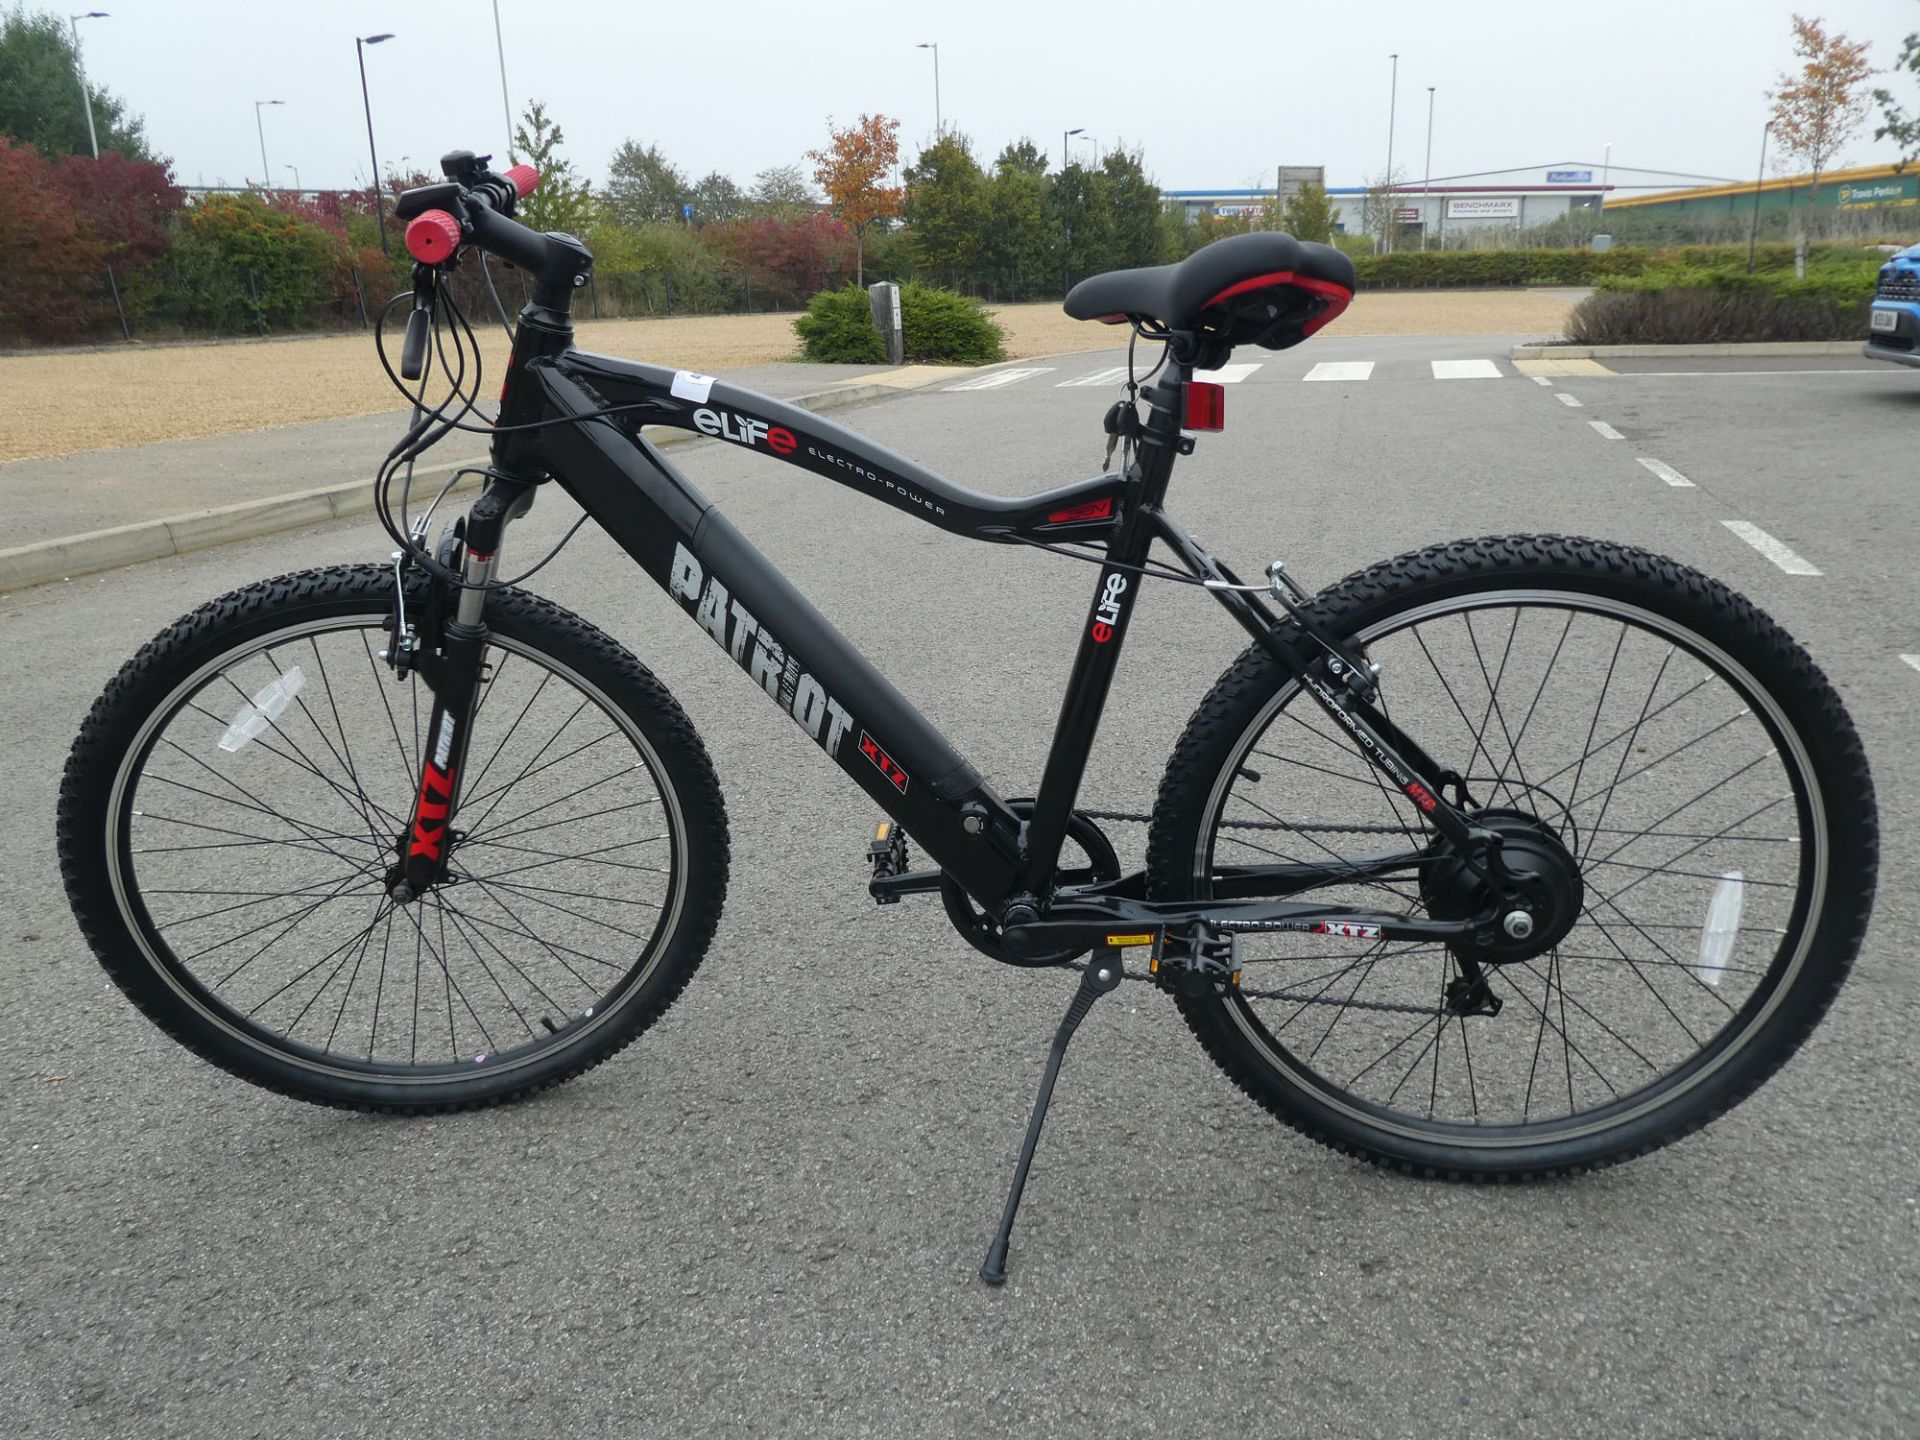 Patriot XTZ E-Life electric bike with battery and charger